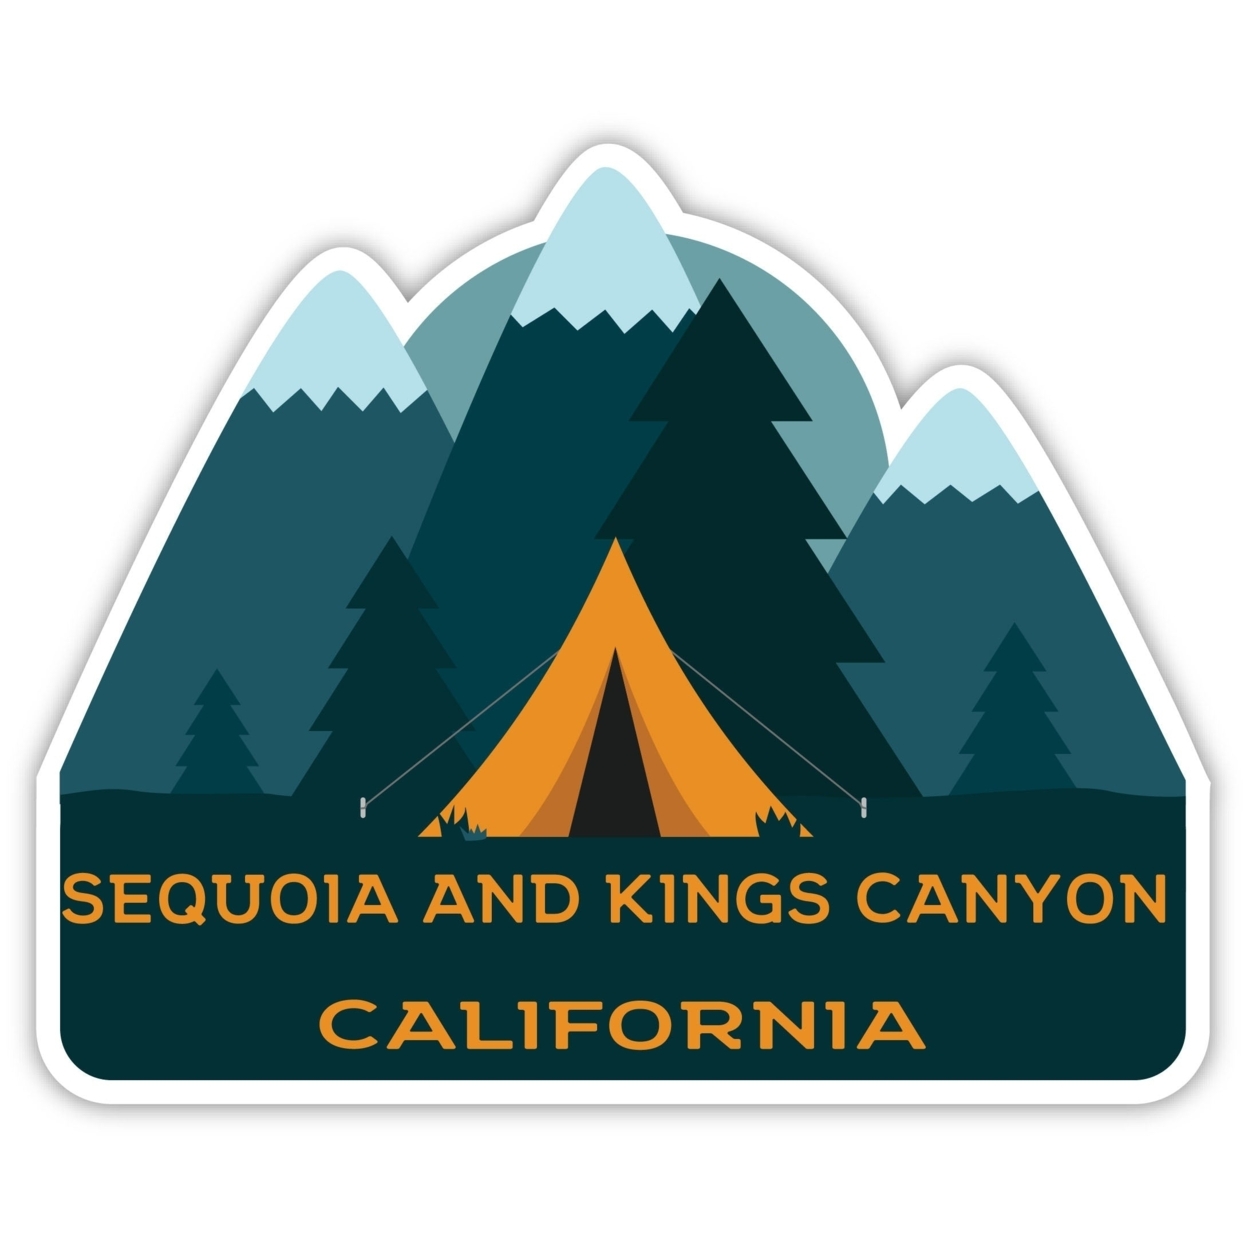 Sequoia And Kings Canyon California Souvenir Decorative Stickers (Choose Theme And Size) - Single Unit, 4-Inch, Tent